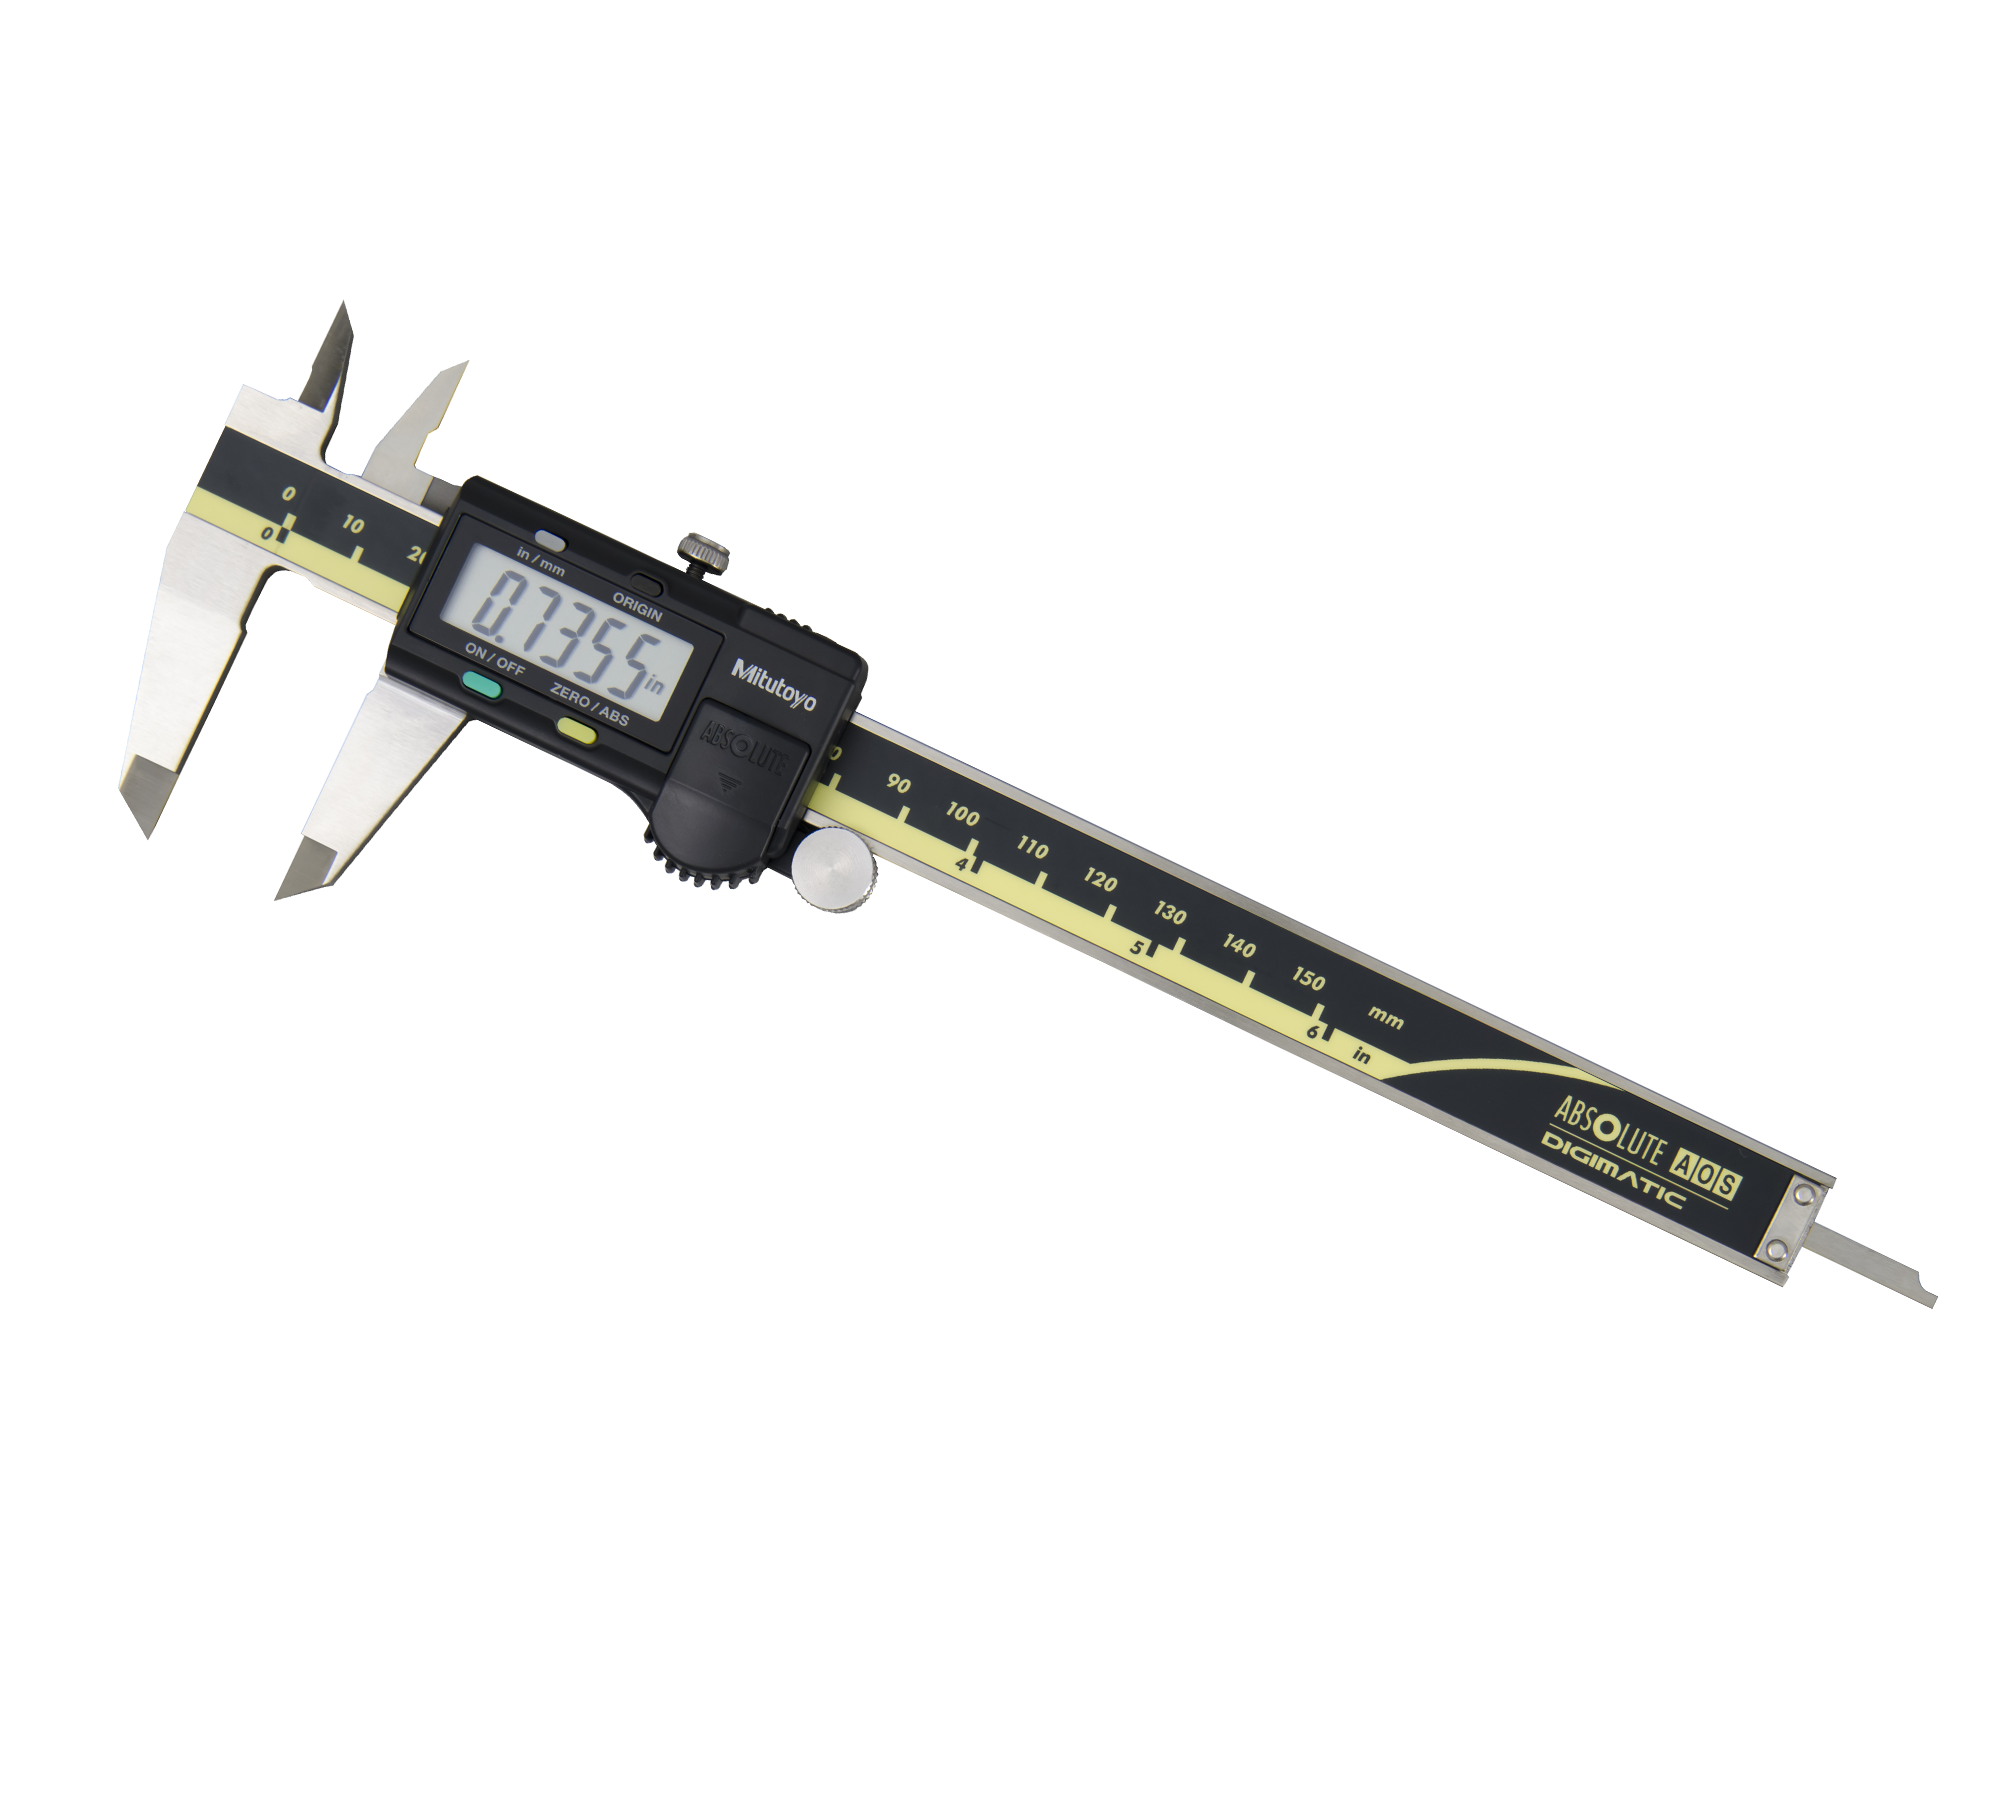 Shop for Digital Calipers With SPC Output at GreatGages.com